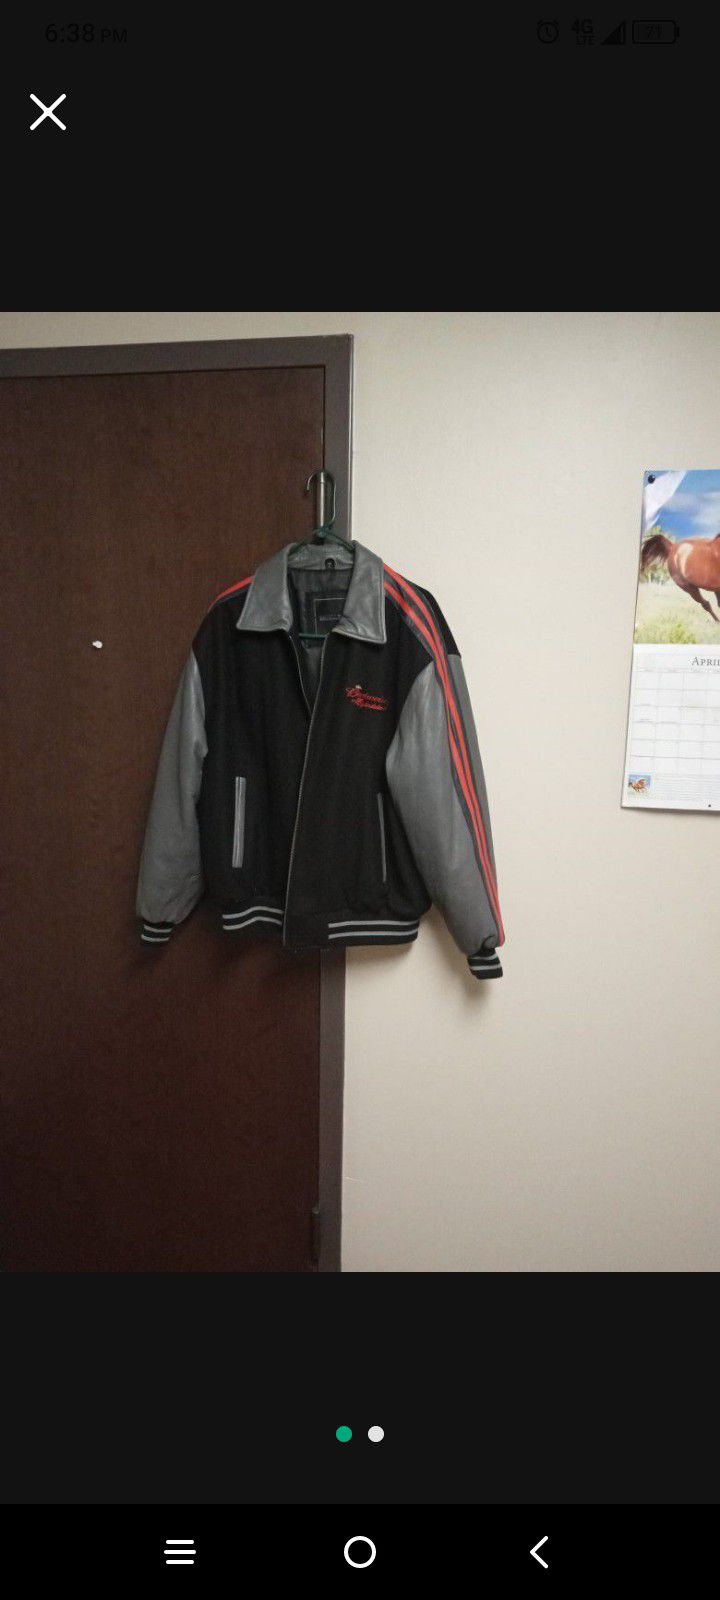 Excelled Black, Grey, Red Budweiser Clydesdale Jacket